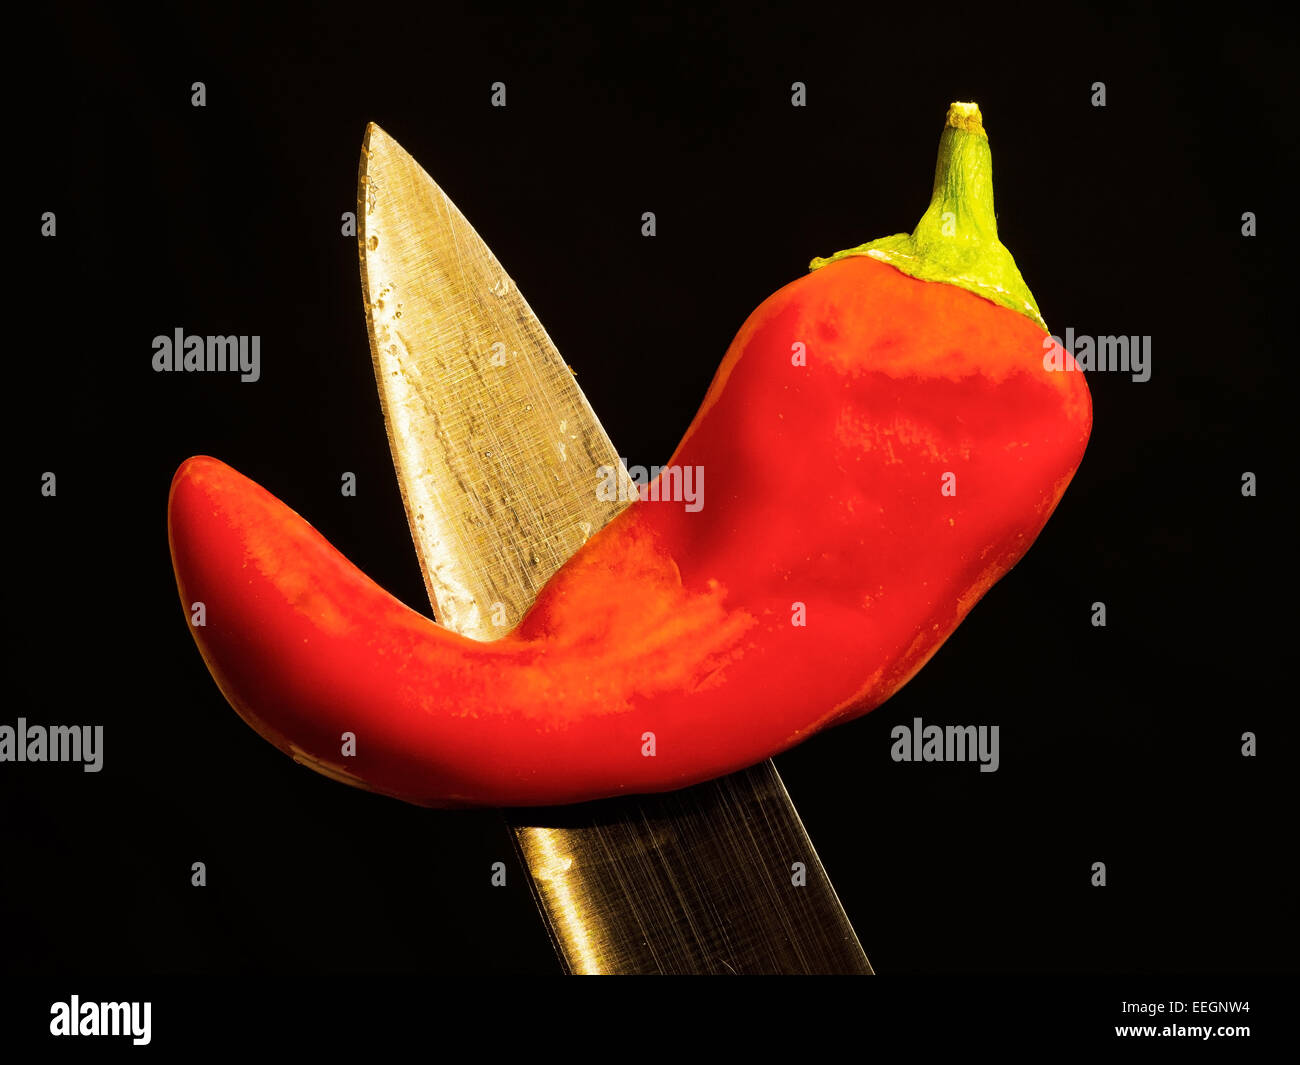 A bright red chili pepper stabbed with a kitchen knife. Stock Photo